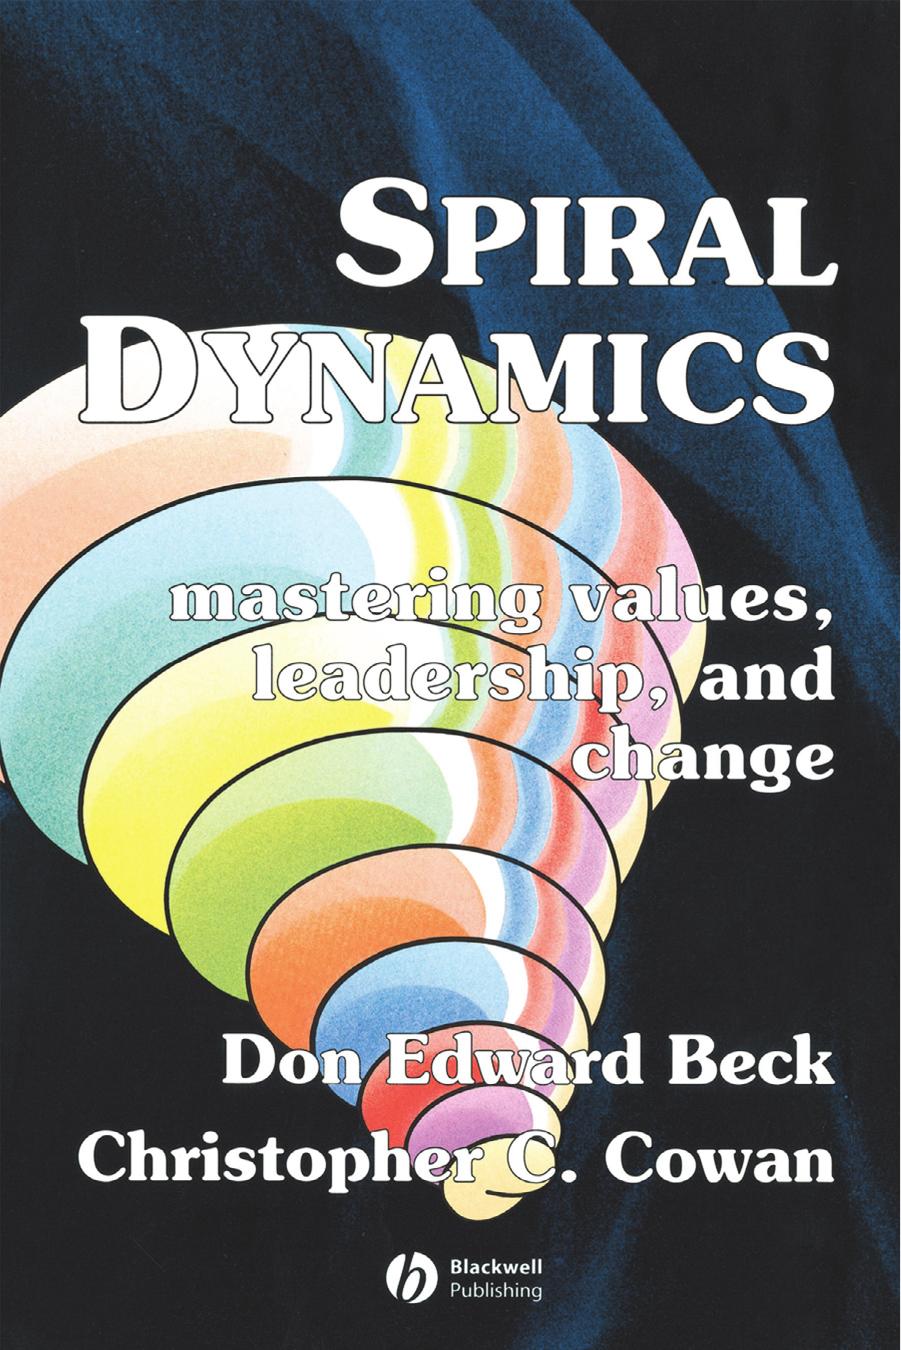 Spiral Dynamics: Mastering Values, Leadership, and Change